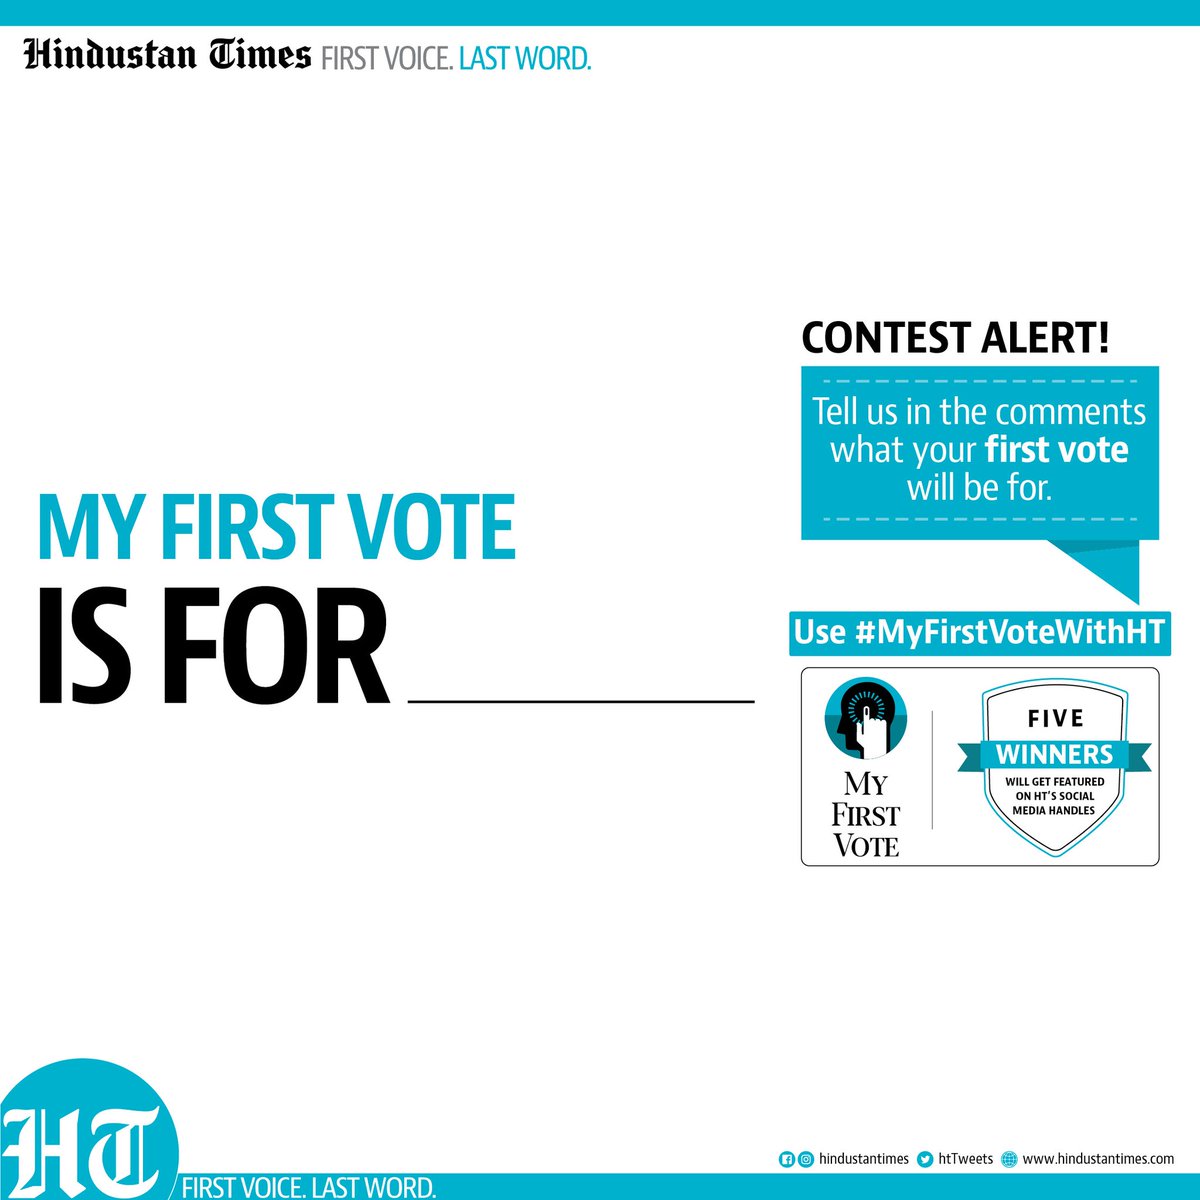 A vote for safety is a vote for freedom. My #FirstVoteWithHT is for secure streets and safe homes for all.